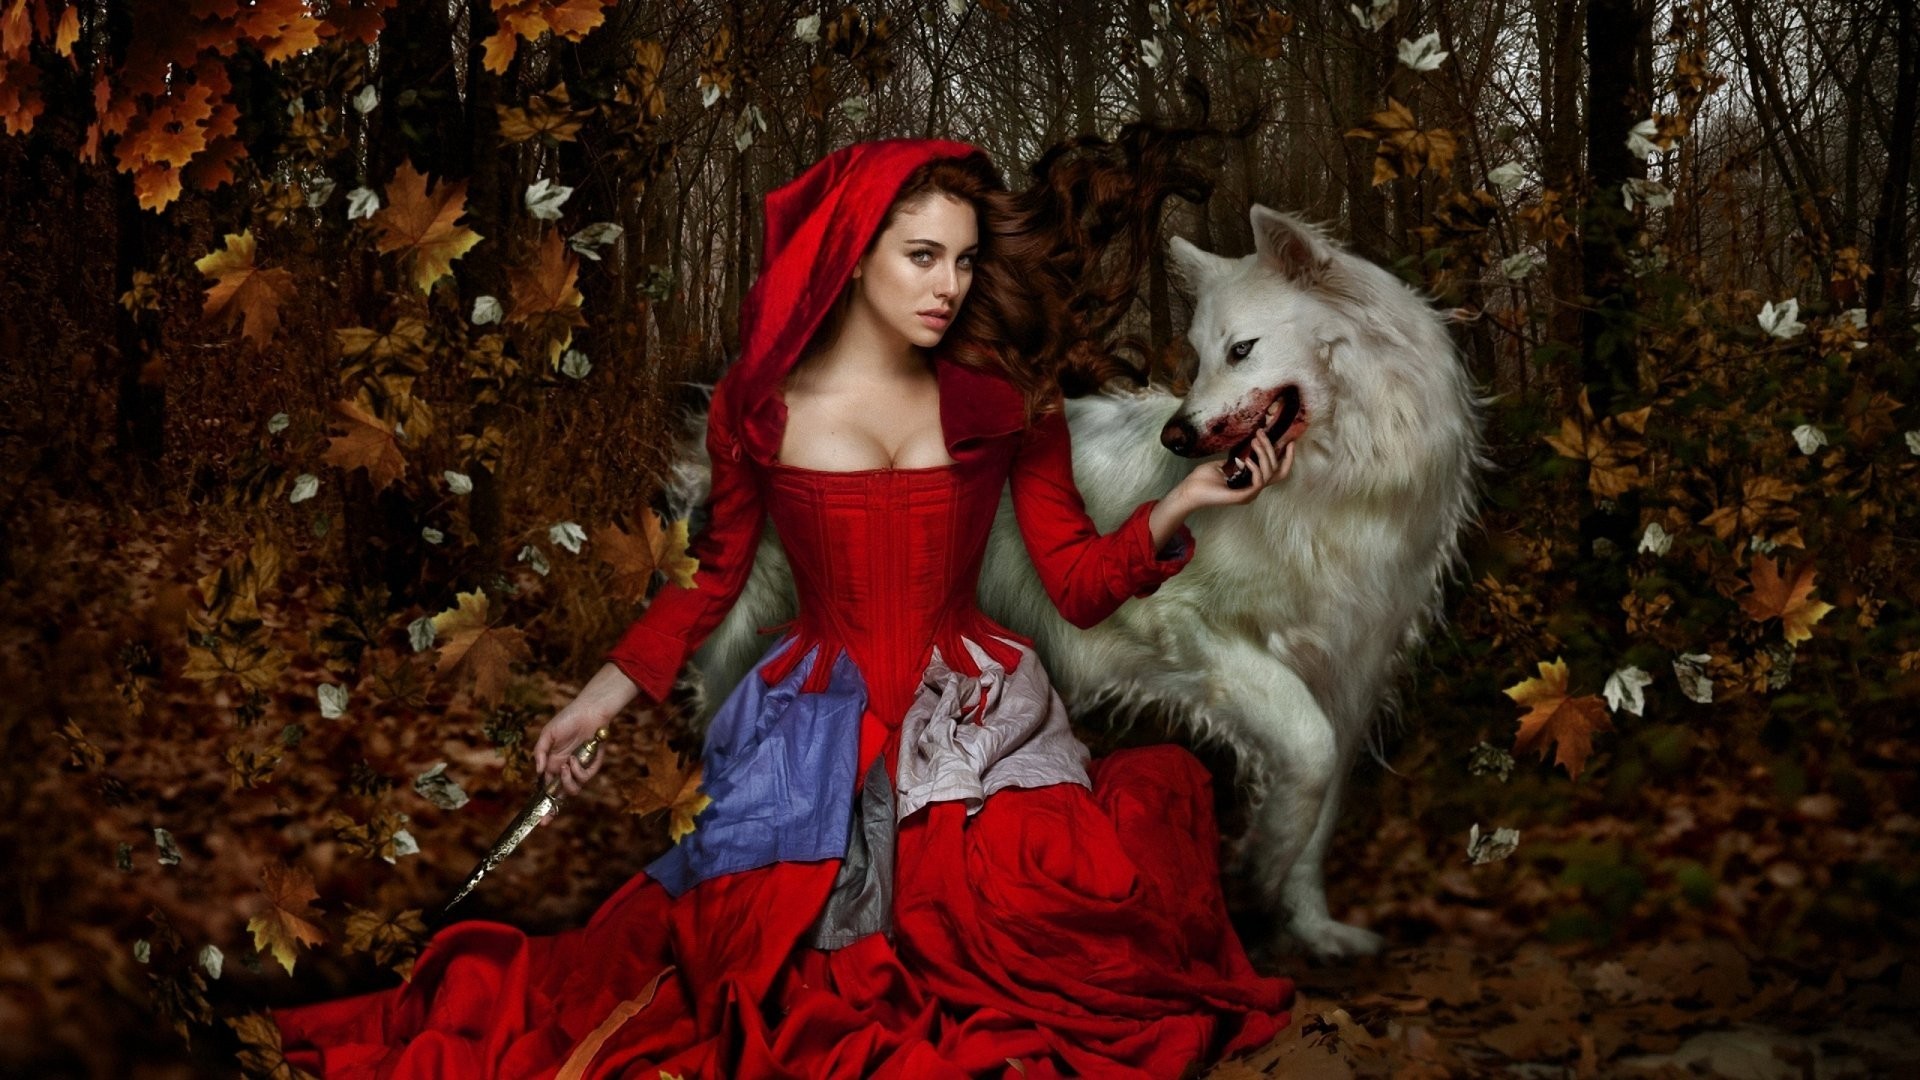 1920x1080 Fantasy - Red Riding Hood Fantasy Girl Woman Knife Wolf Forest Fall  Wallpaper